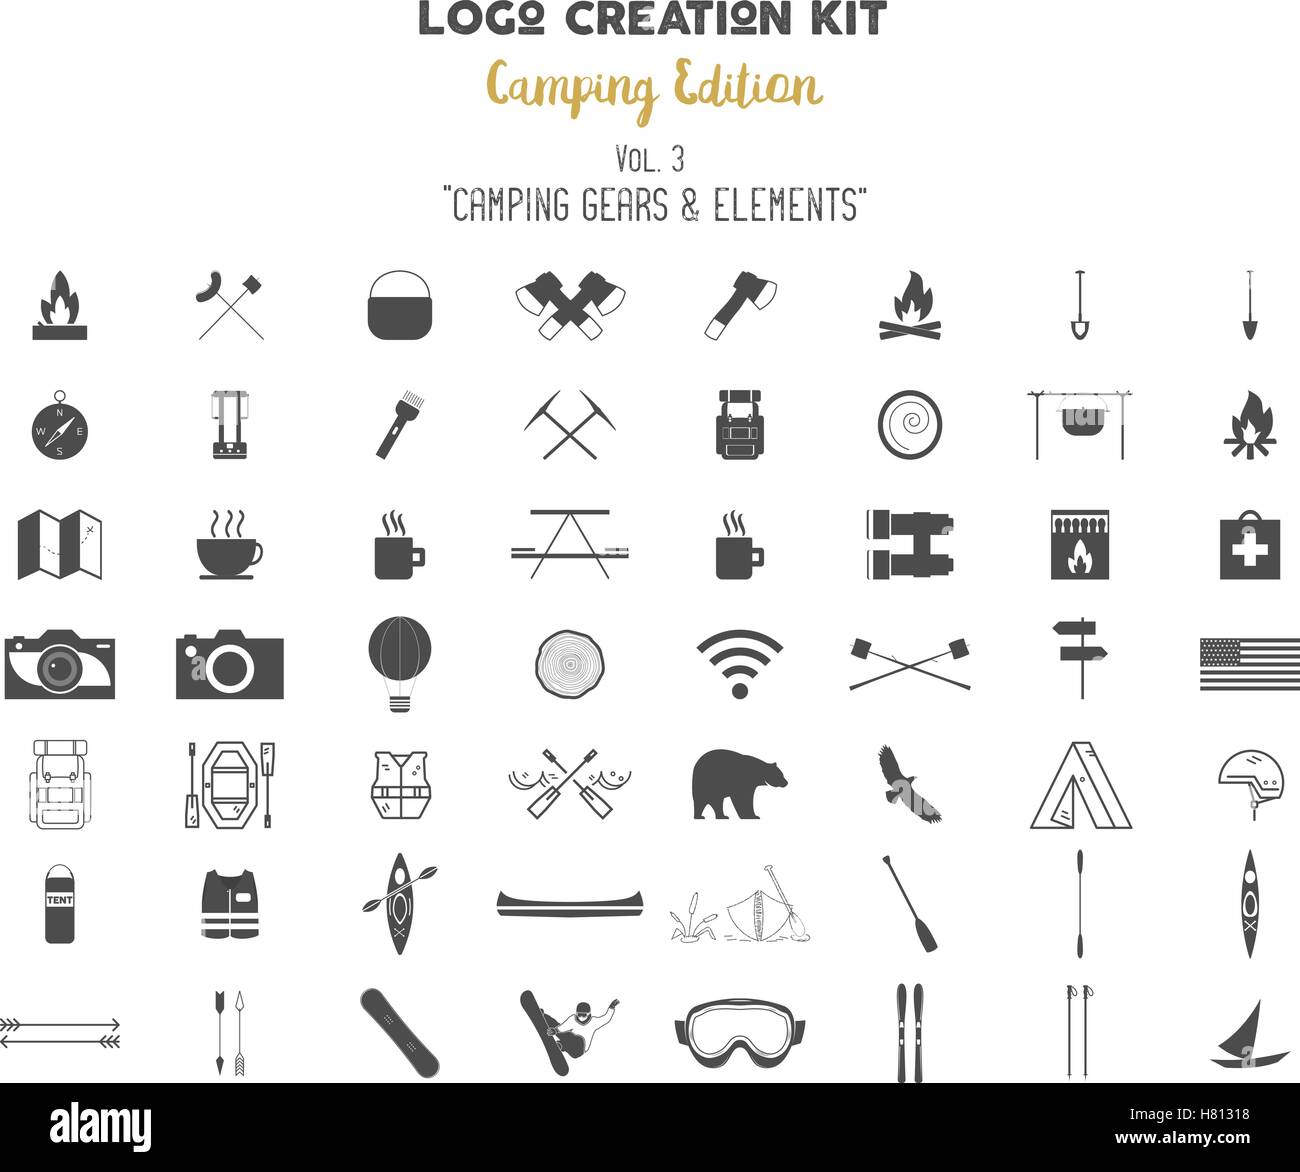 Logo creation kit bundle. Camping Edition set. Travel gear, vector camp  symbols and elements. Create your own outdoor label, wilderness retro  patch, adventure vintage badges, hiking stamps Stock Vector Image & Art 